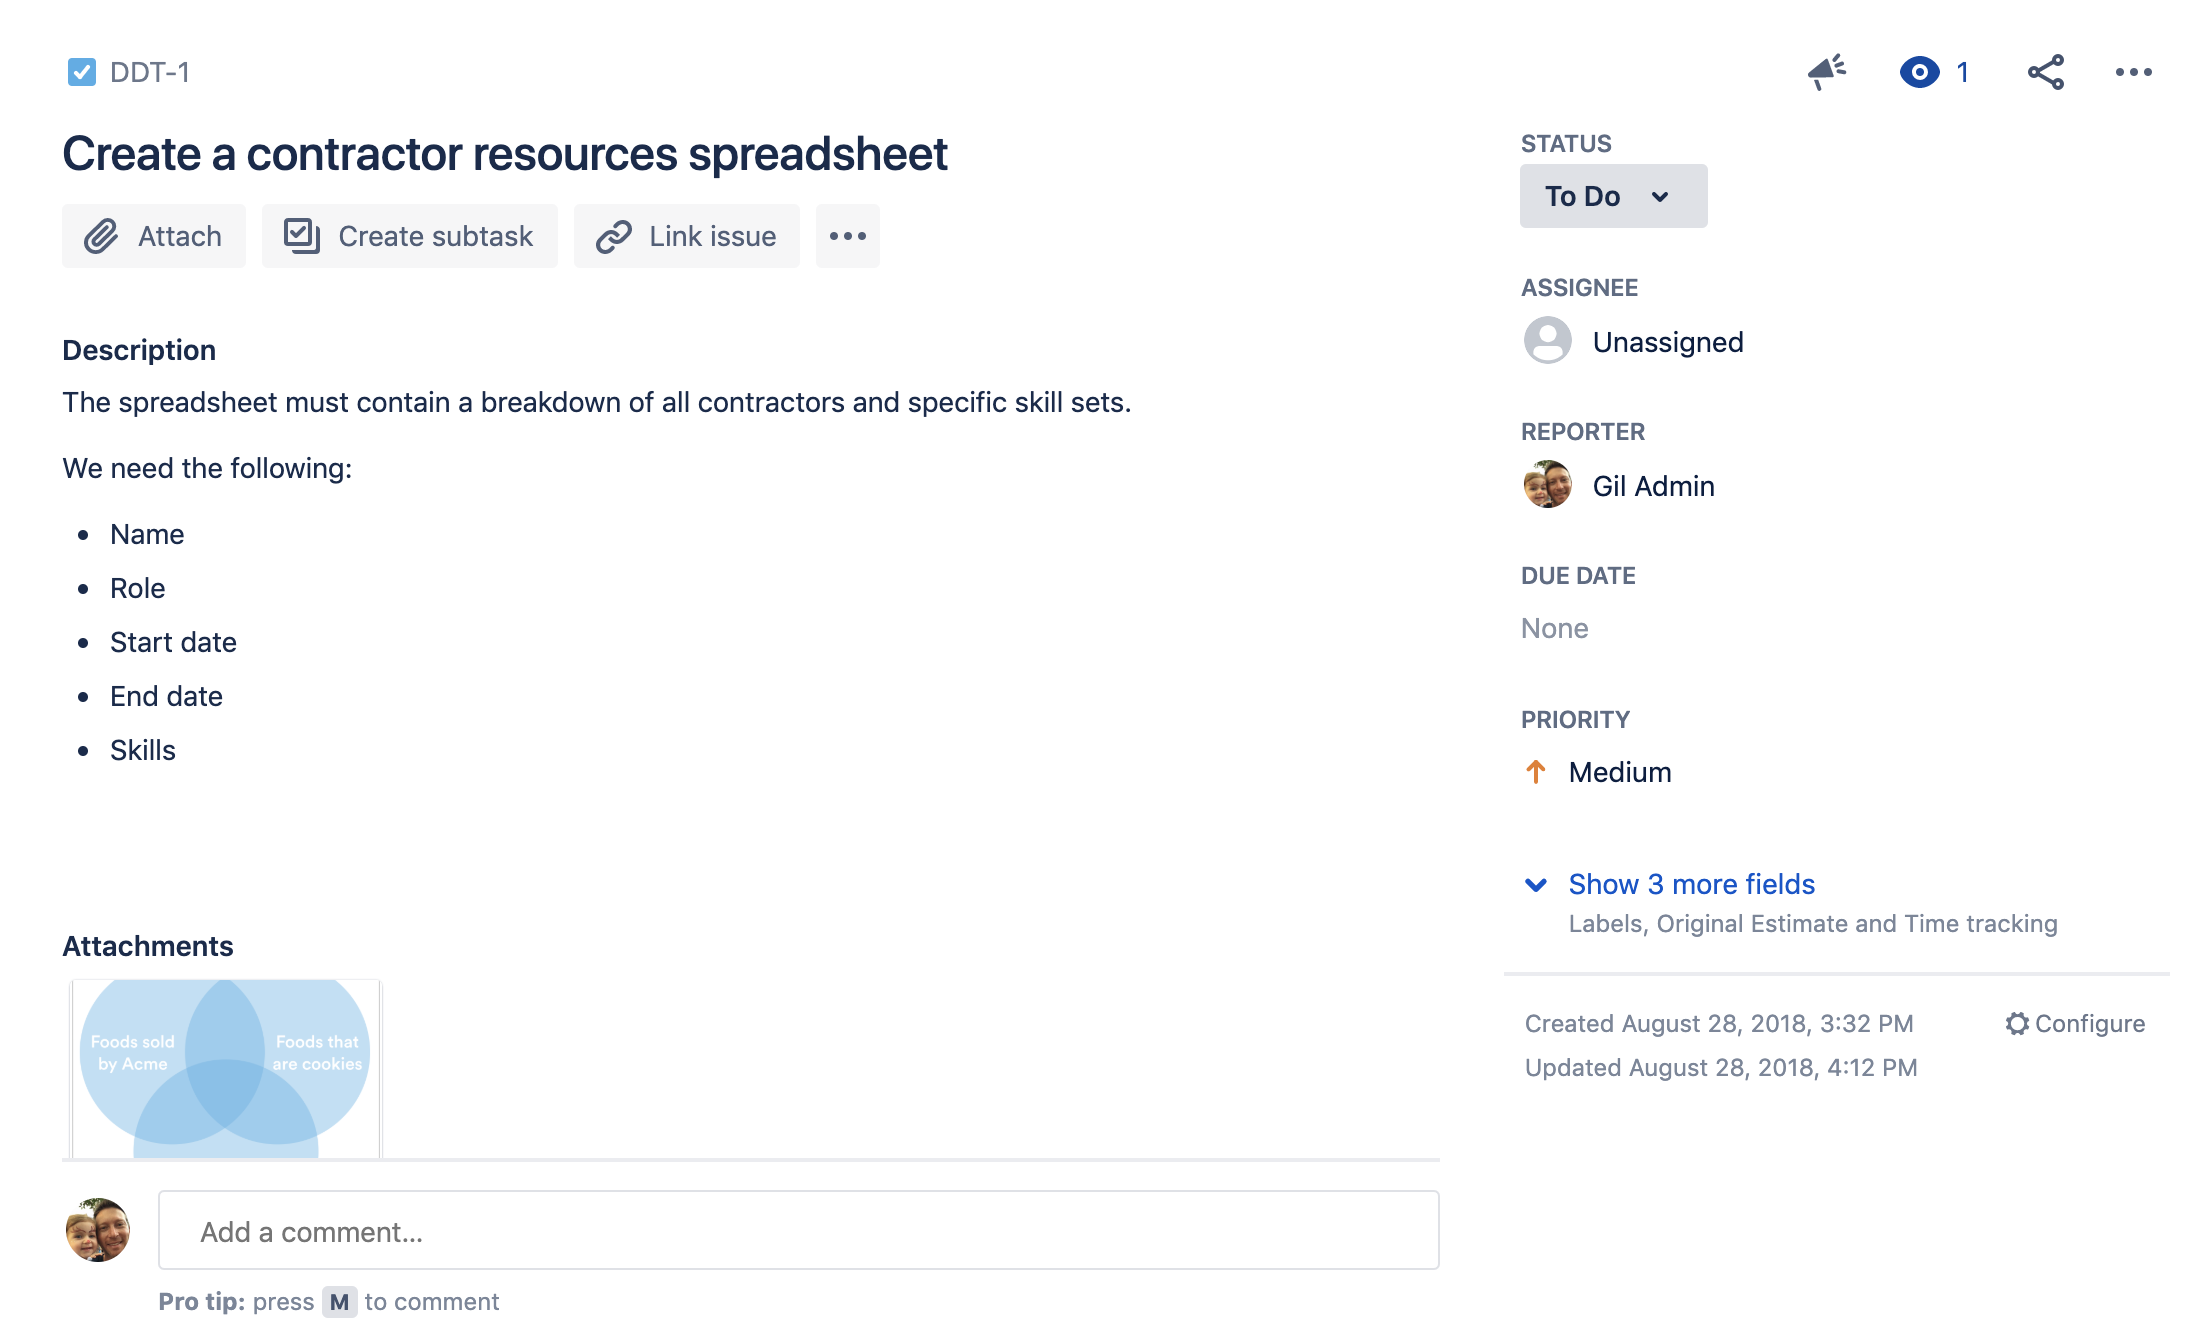 Jira task in the to do status to create a contractor resources spreadsheet.